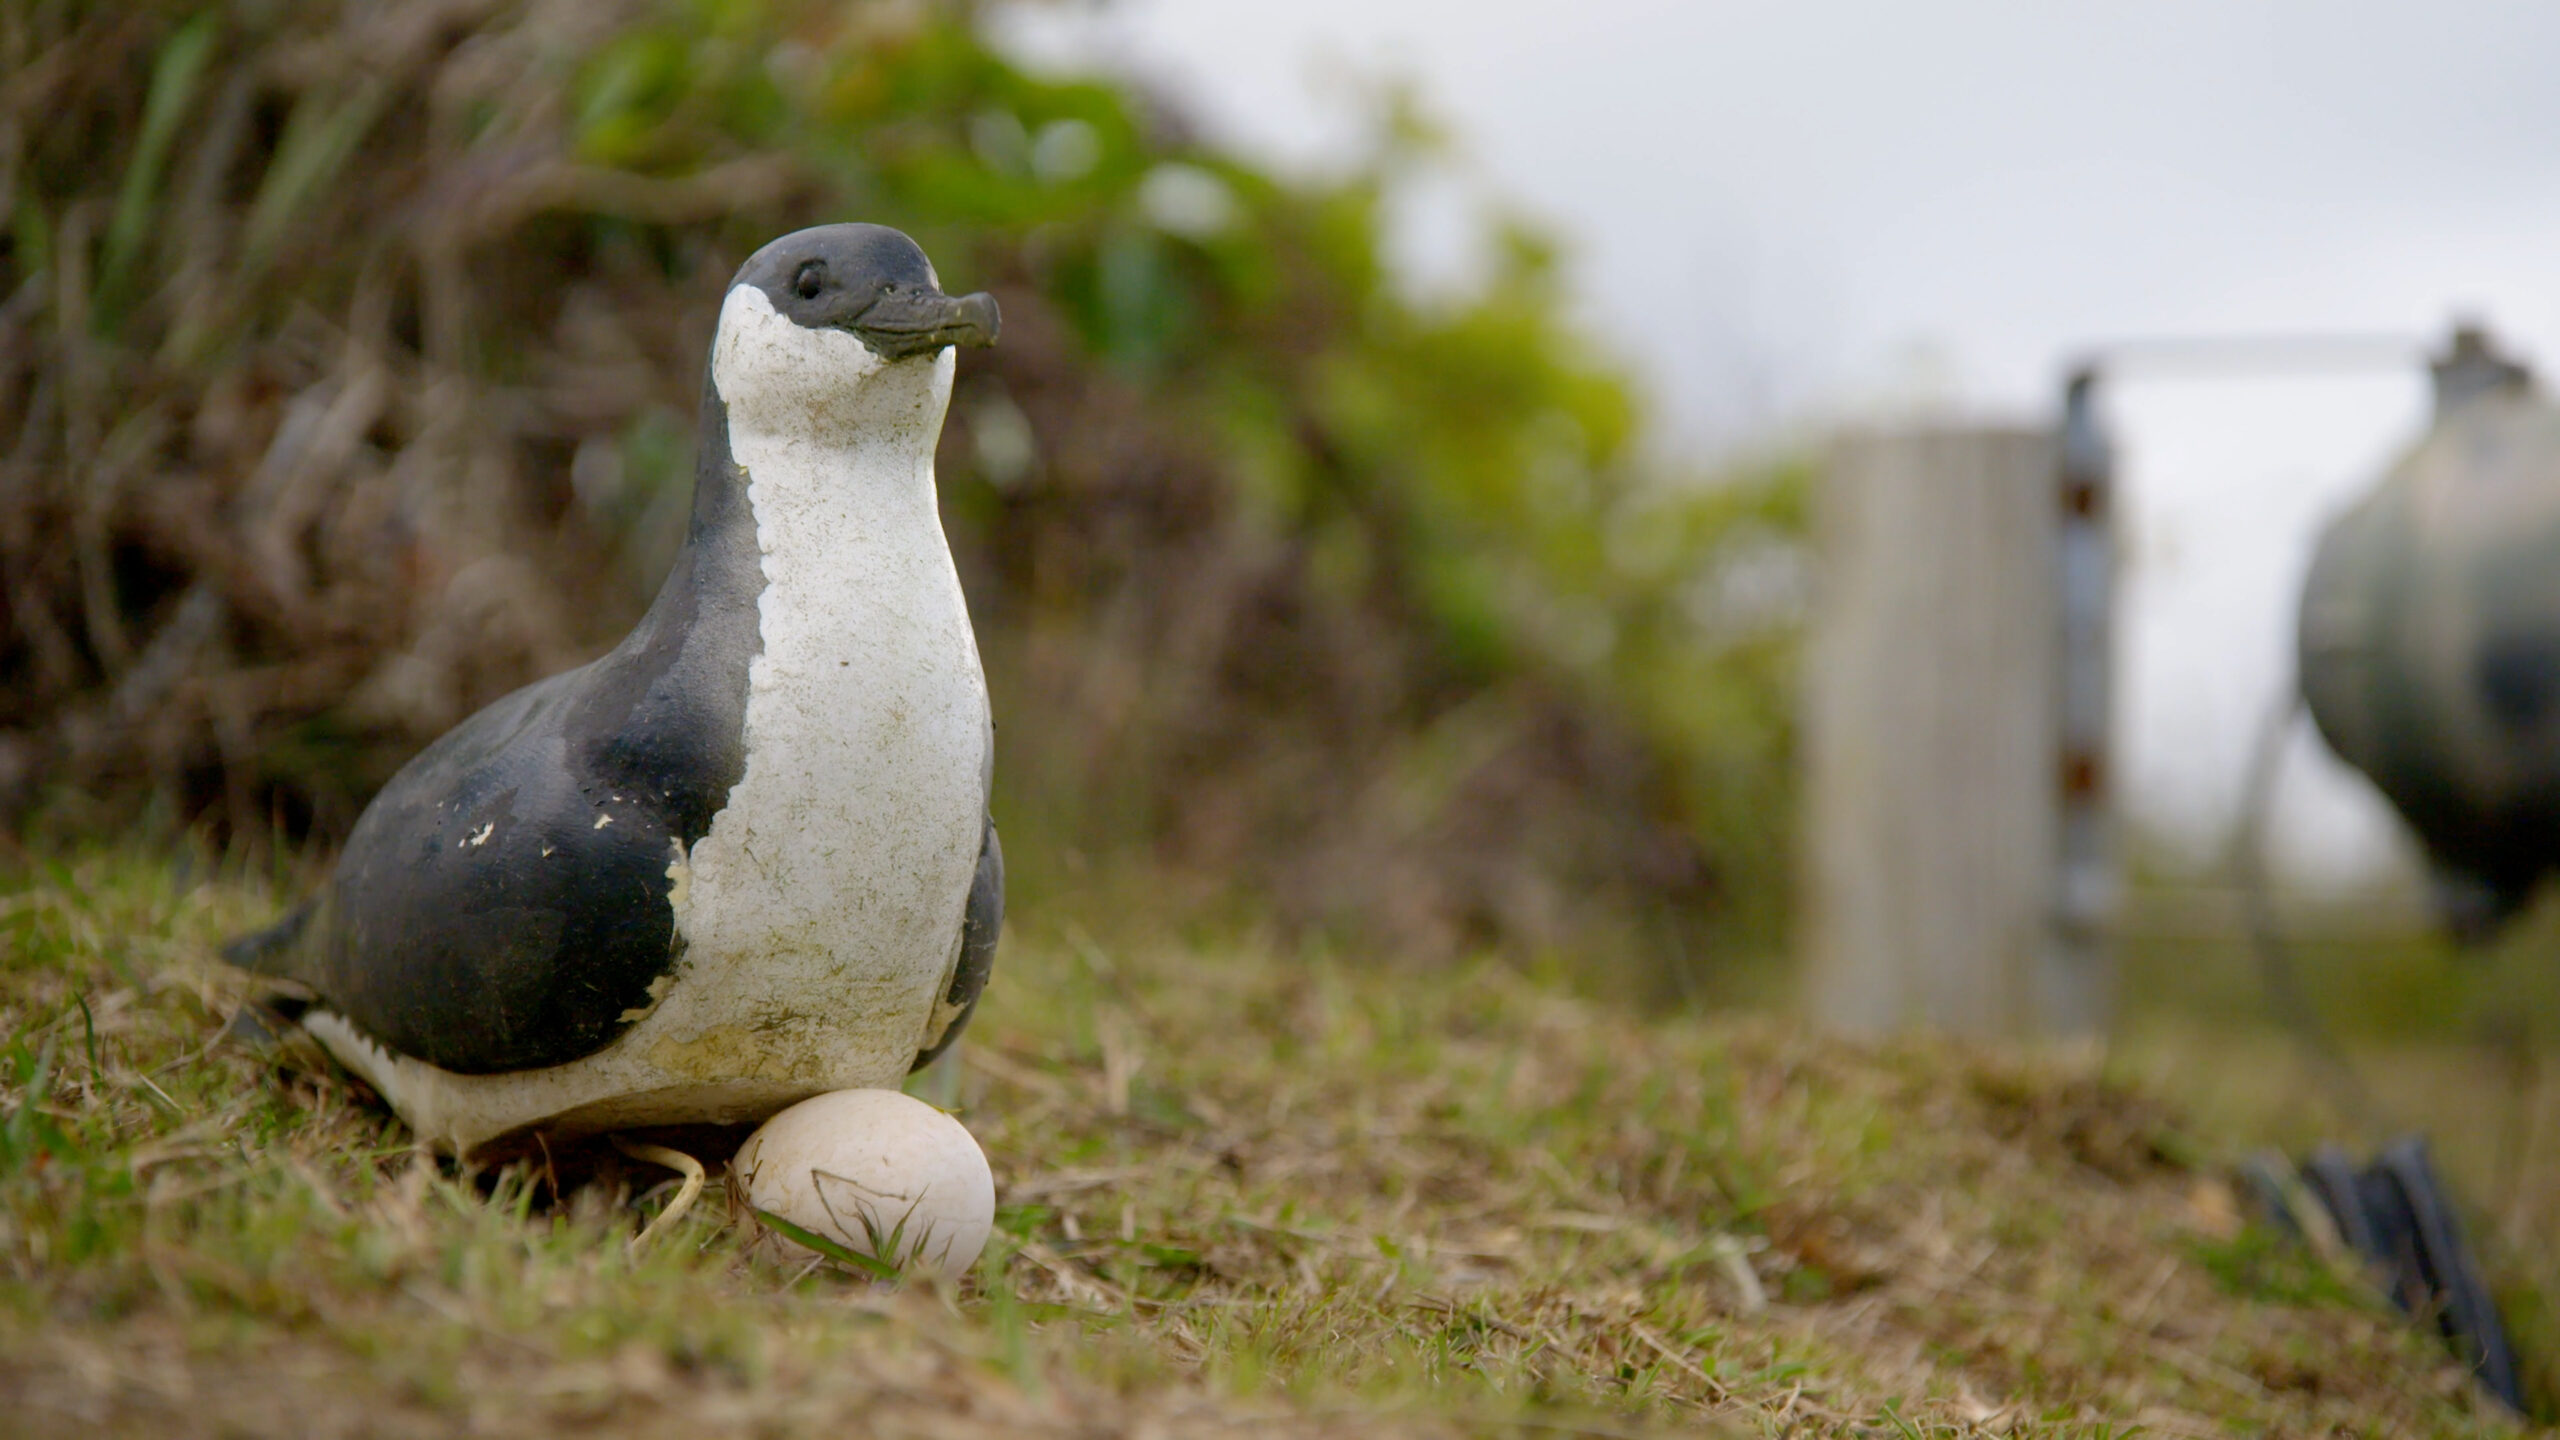 A seabird decoy sitting on a fake egg with green plants in the background.